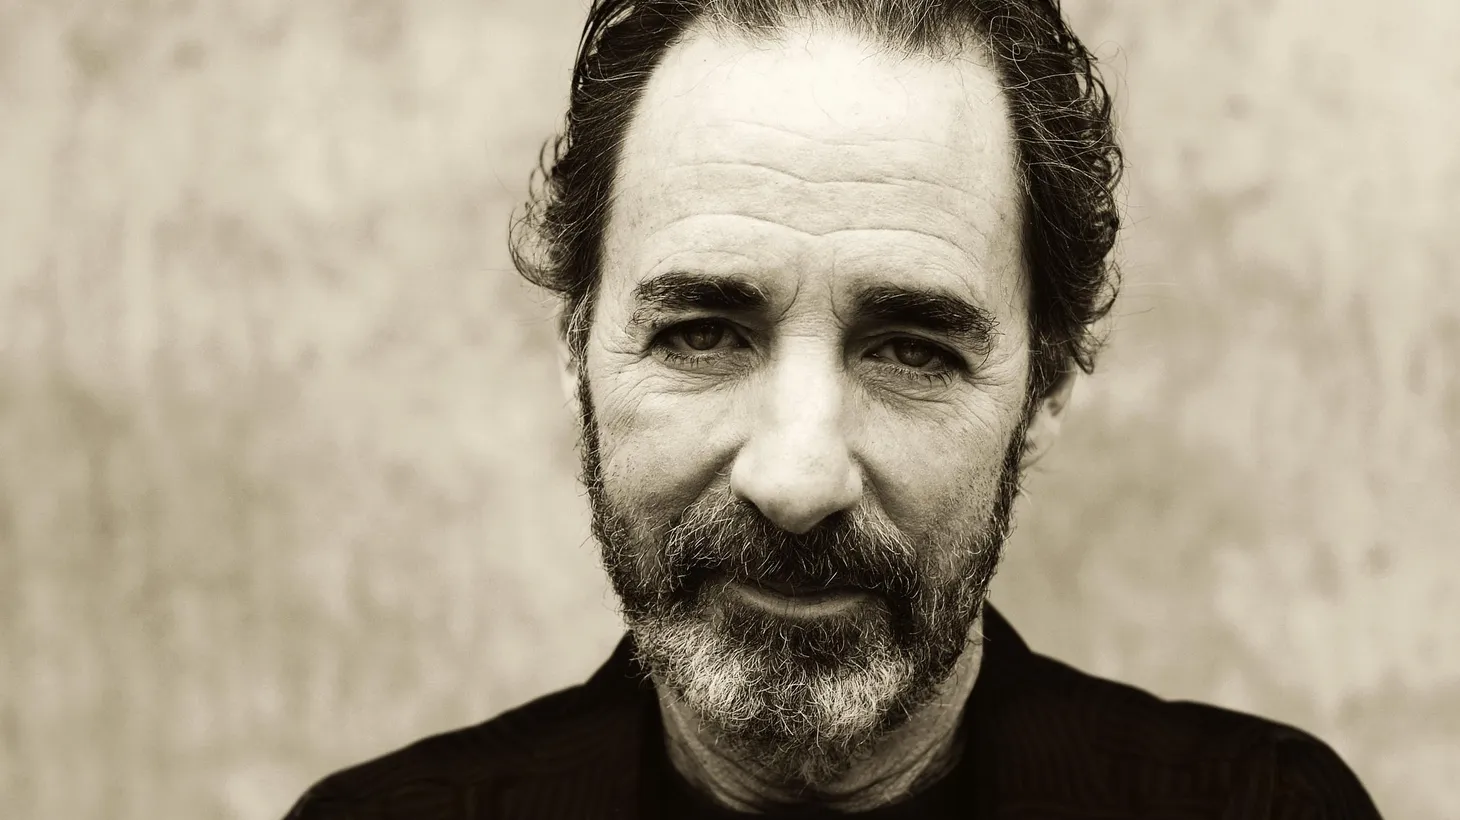 Support le Show's broadcast and archived audio on KCRW.com and HarryShearer.com. Please subscribe or renew online to KCRW.